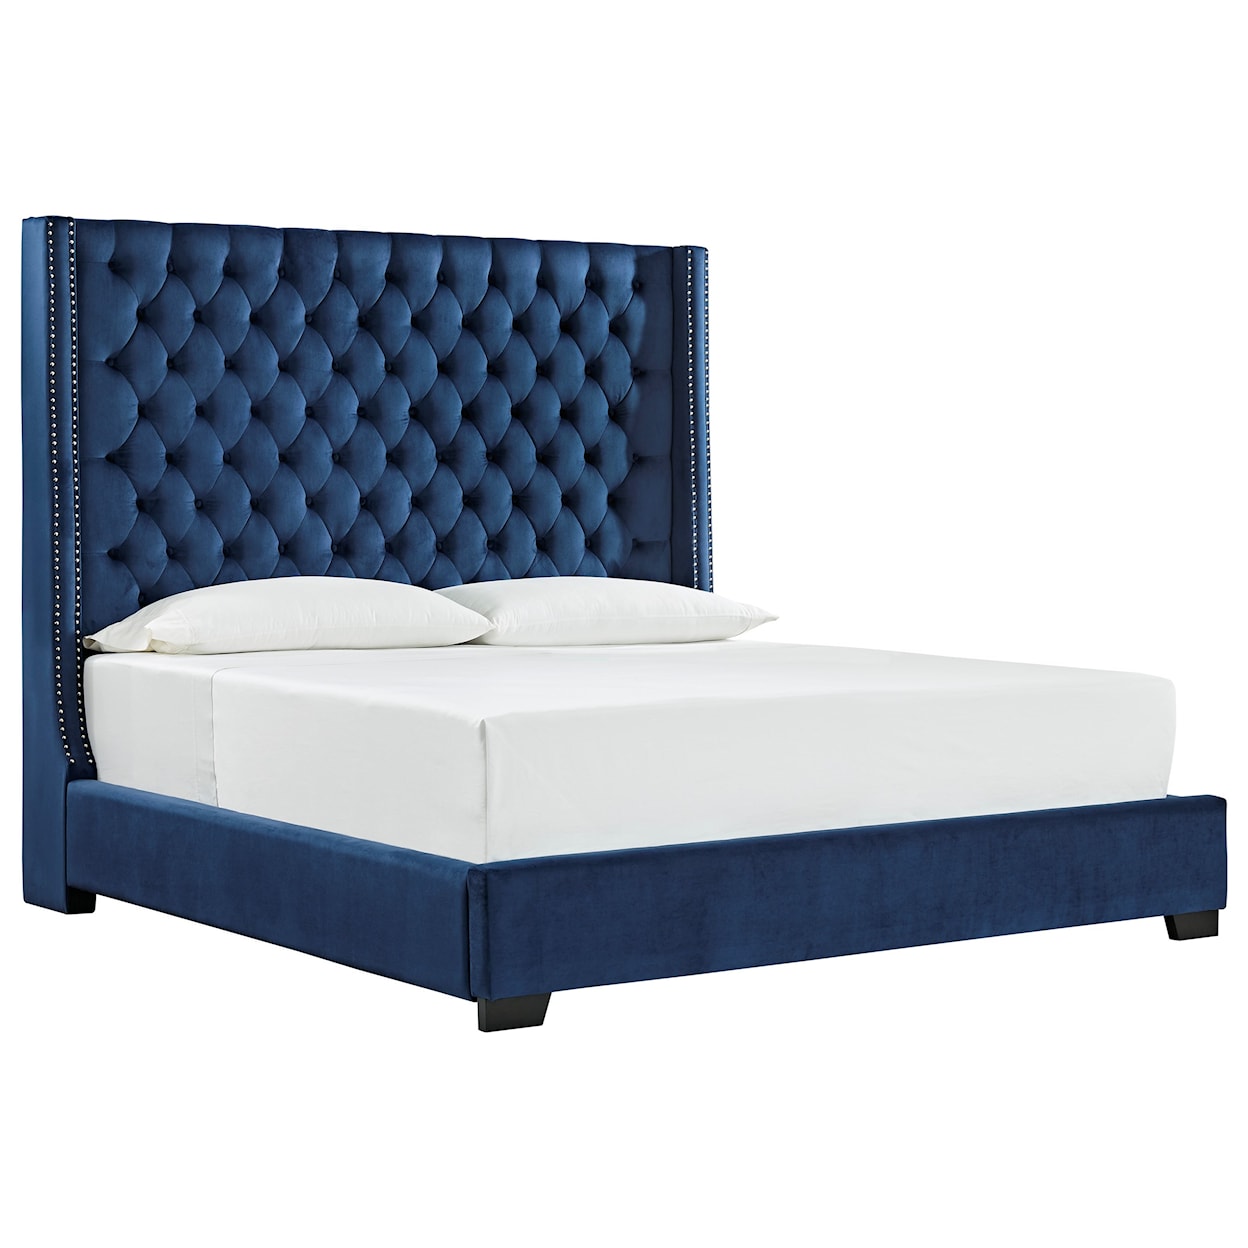 Signature Design by Ashley Coralayne California King Upholstered Bed